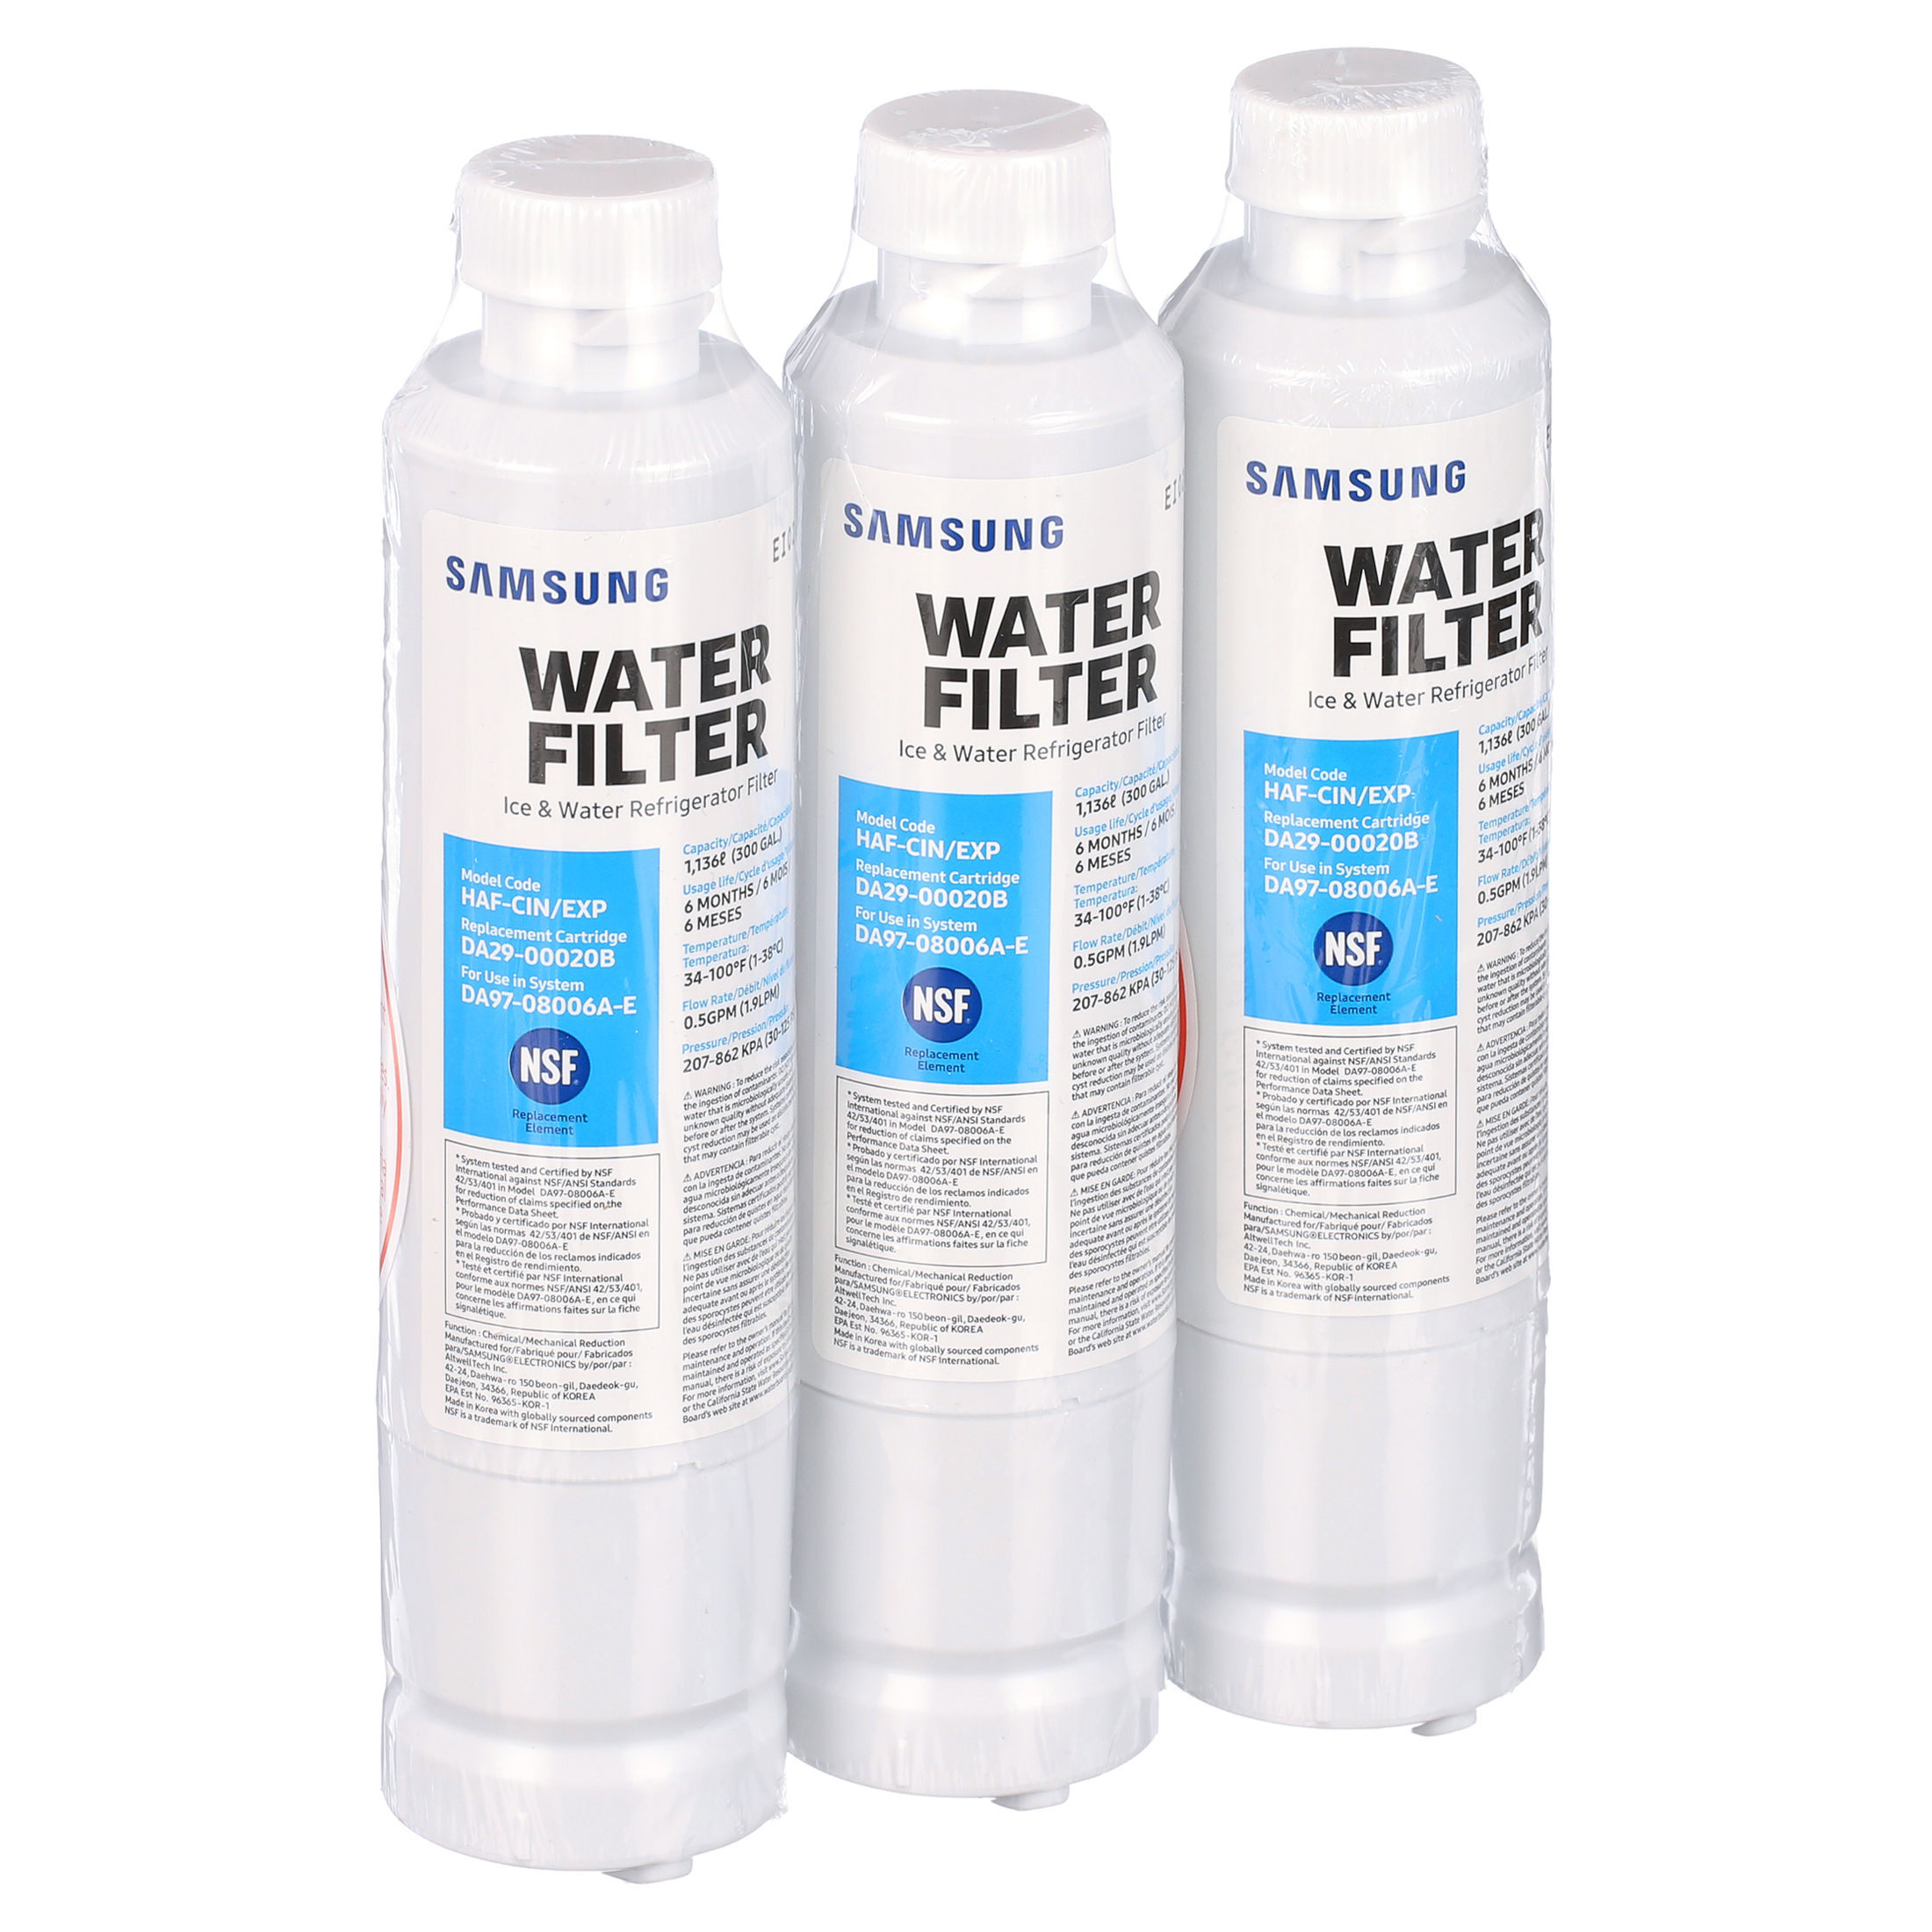 Genuine HAF-CIN Samsung Replacement Water Filter - 3 Pack, Blue and White - image 1 of 6